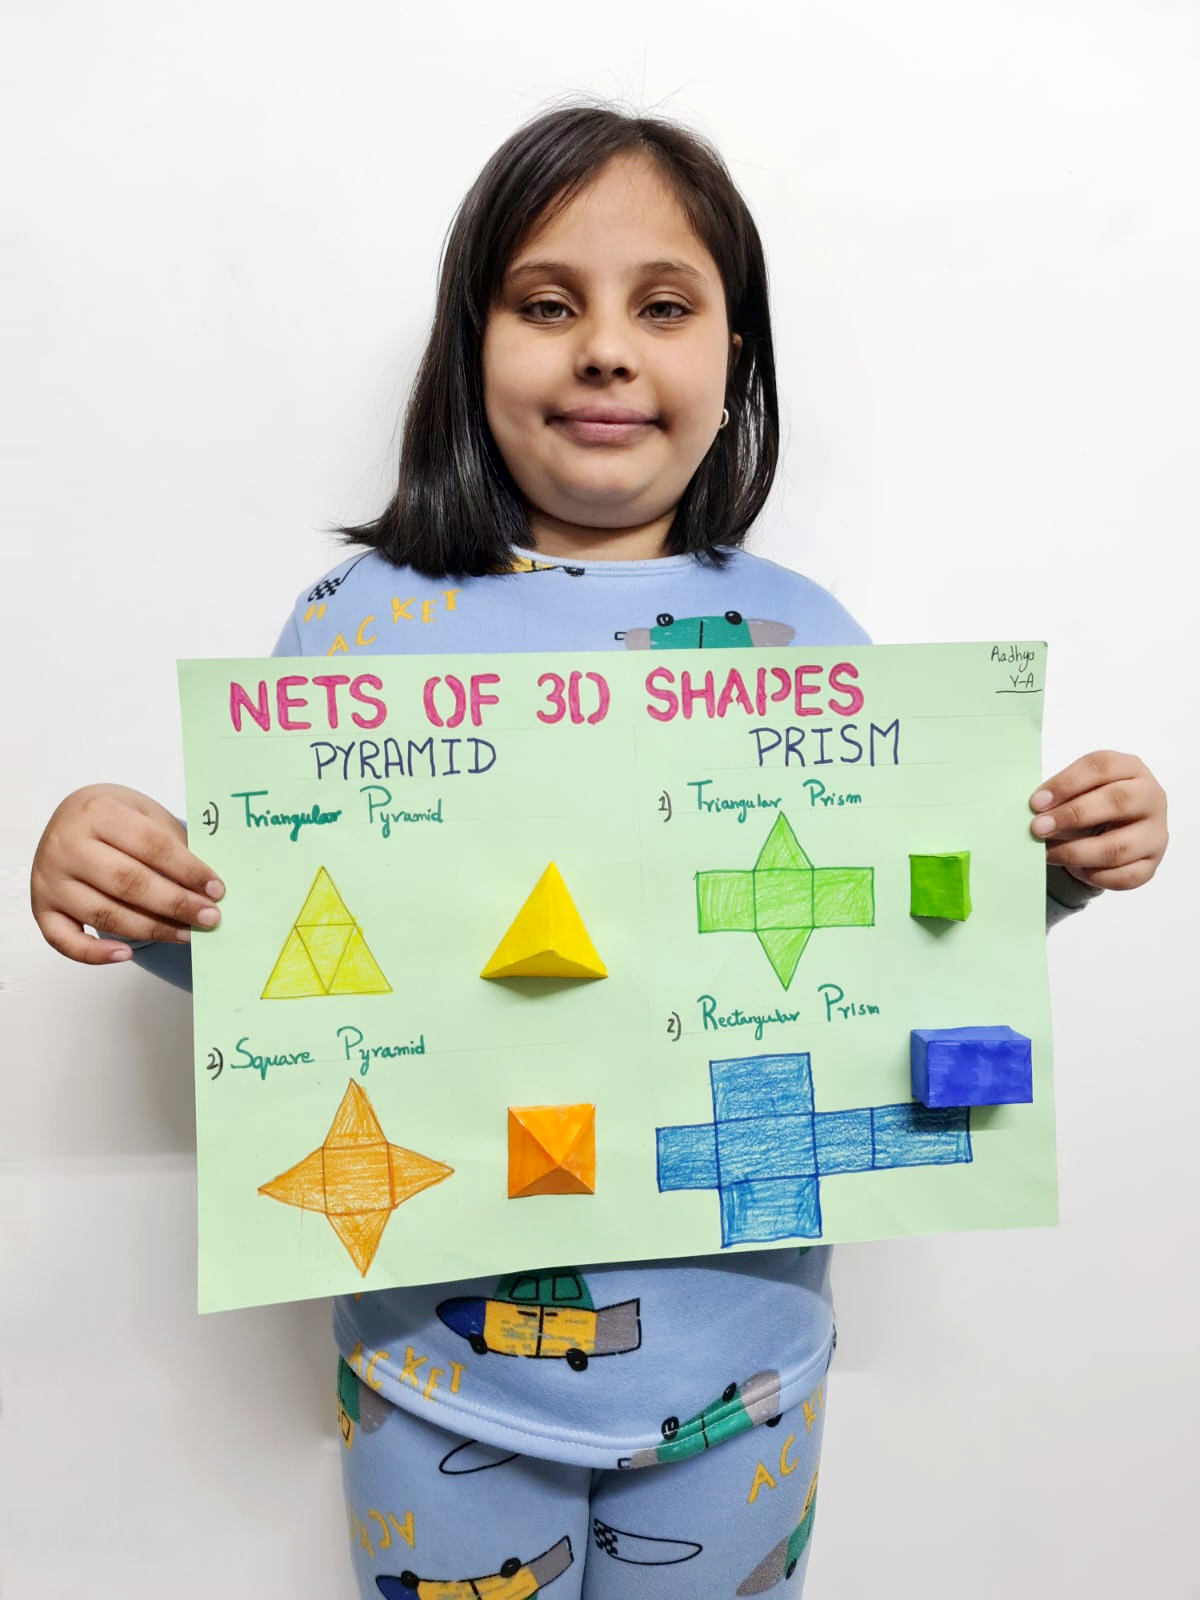 Presidium Dwarka-6, STUDENTS LEARN ABOUT THE 3D SHAPES WITH A FUN ACTIVITY